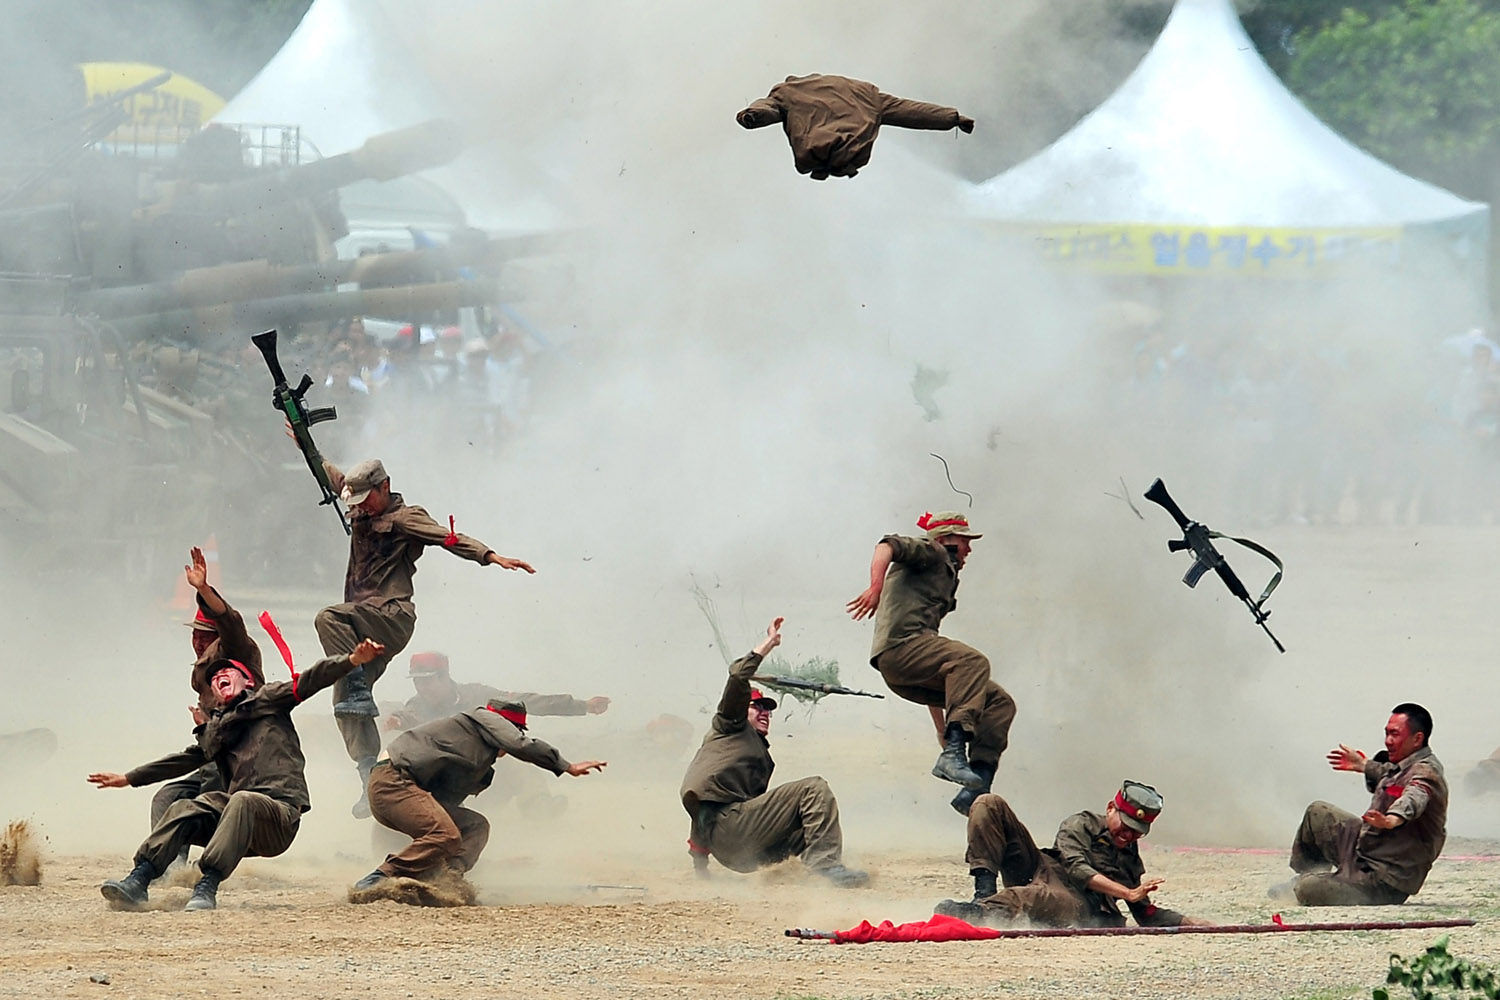 June 22, 2013. South Korean soldiers take part in a re-enactment of the battle of Chuncheon at the beginning of the 1950-53 Korean War, to mark its 63rd anniversary in Chuncheon, South Korea.